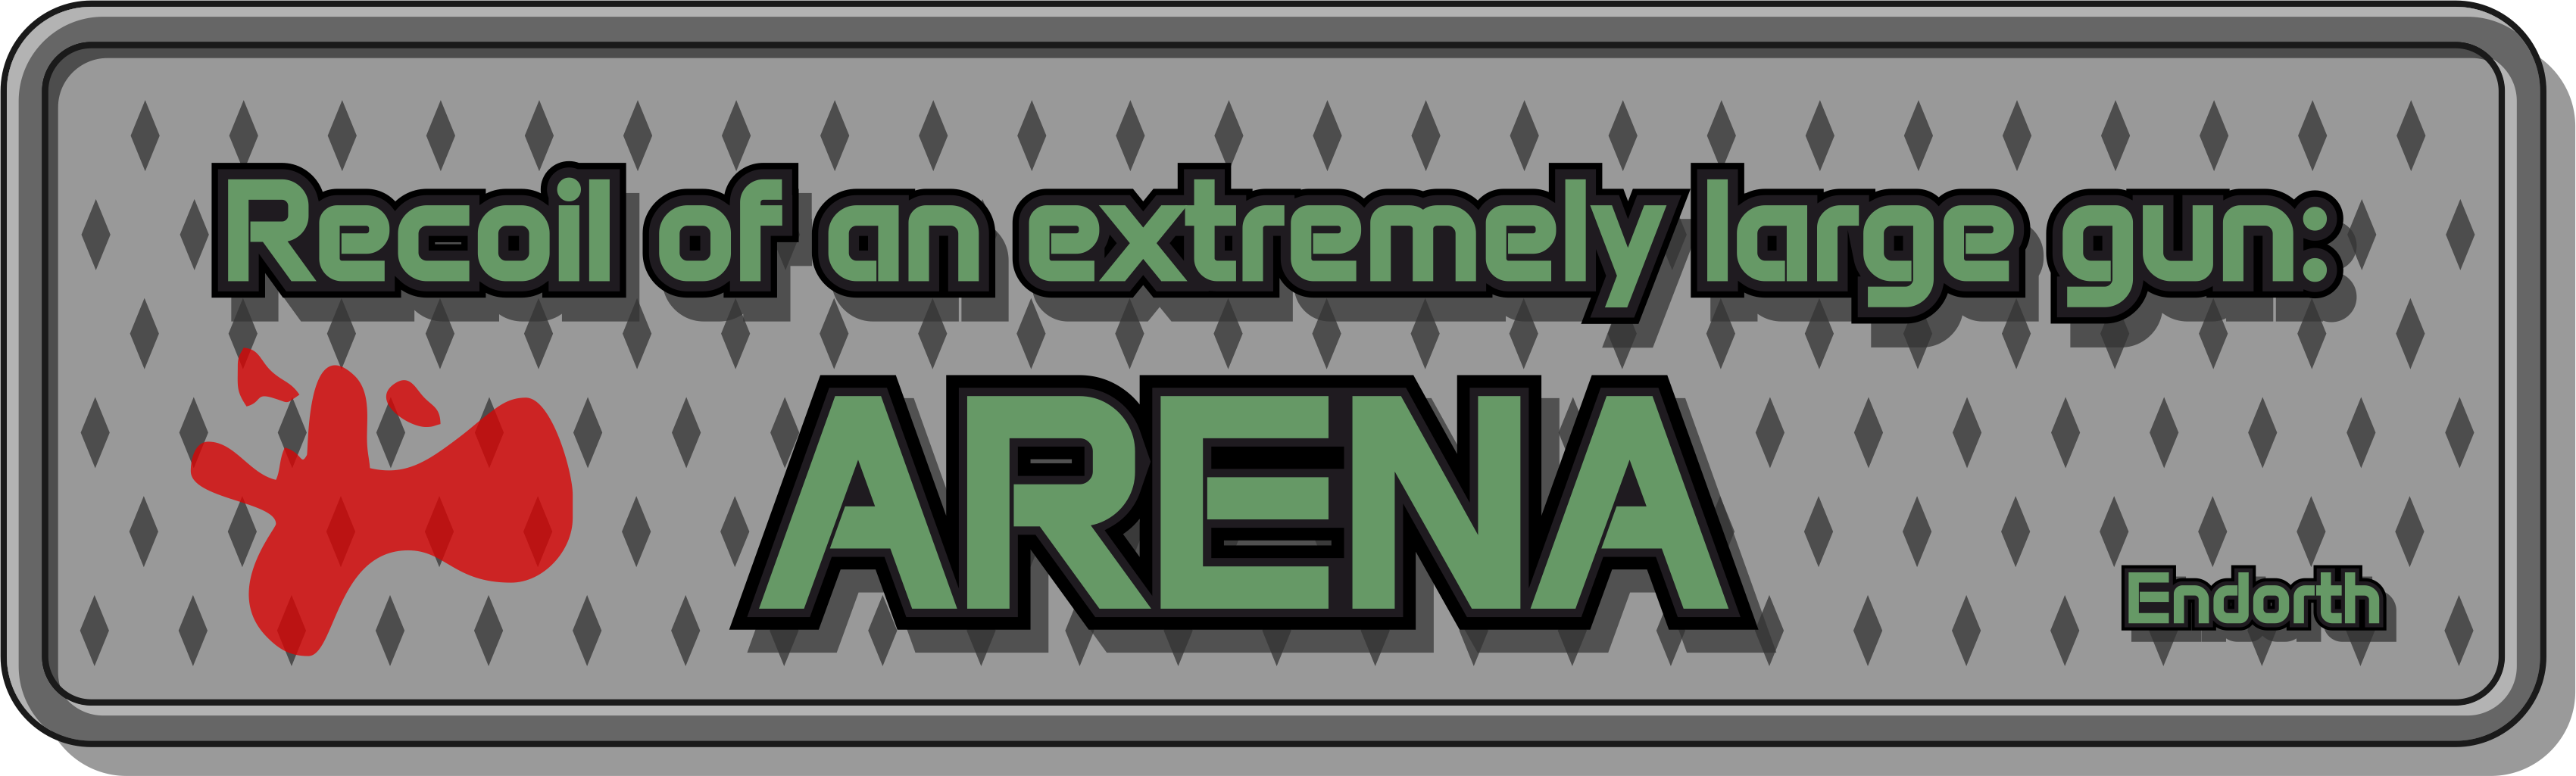 Recoil of an extremely large gun: Arena